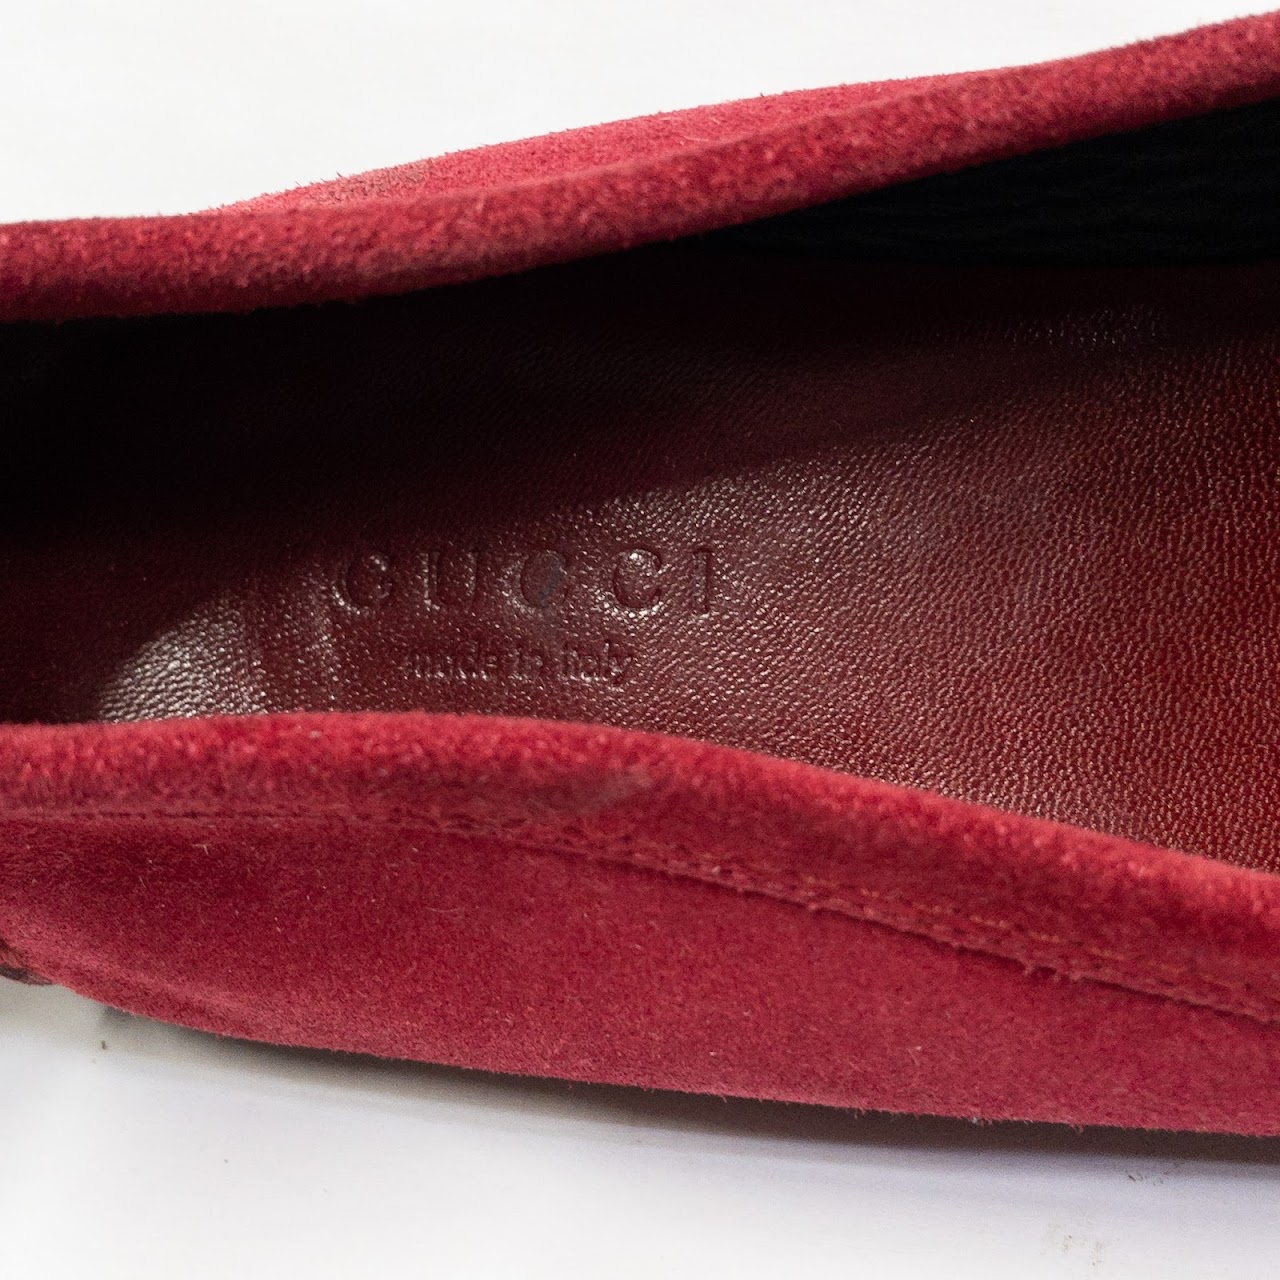 Gucci Red Suede Loafers